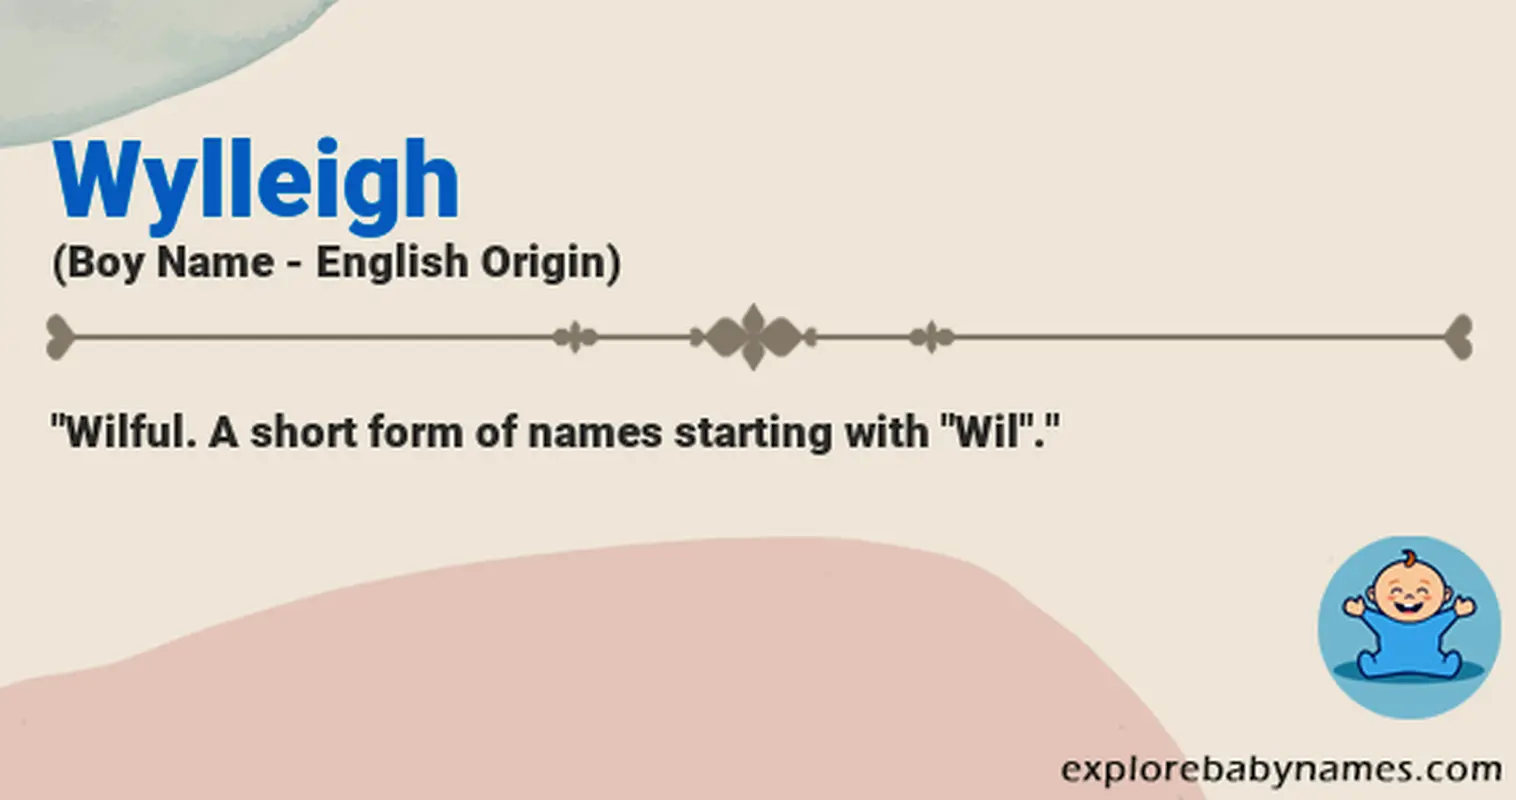 Meaning of Wylleigh